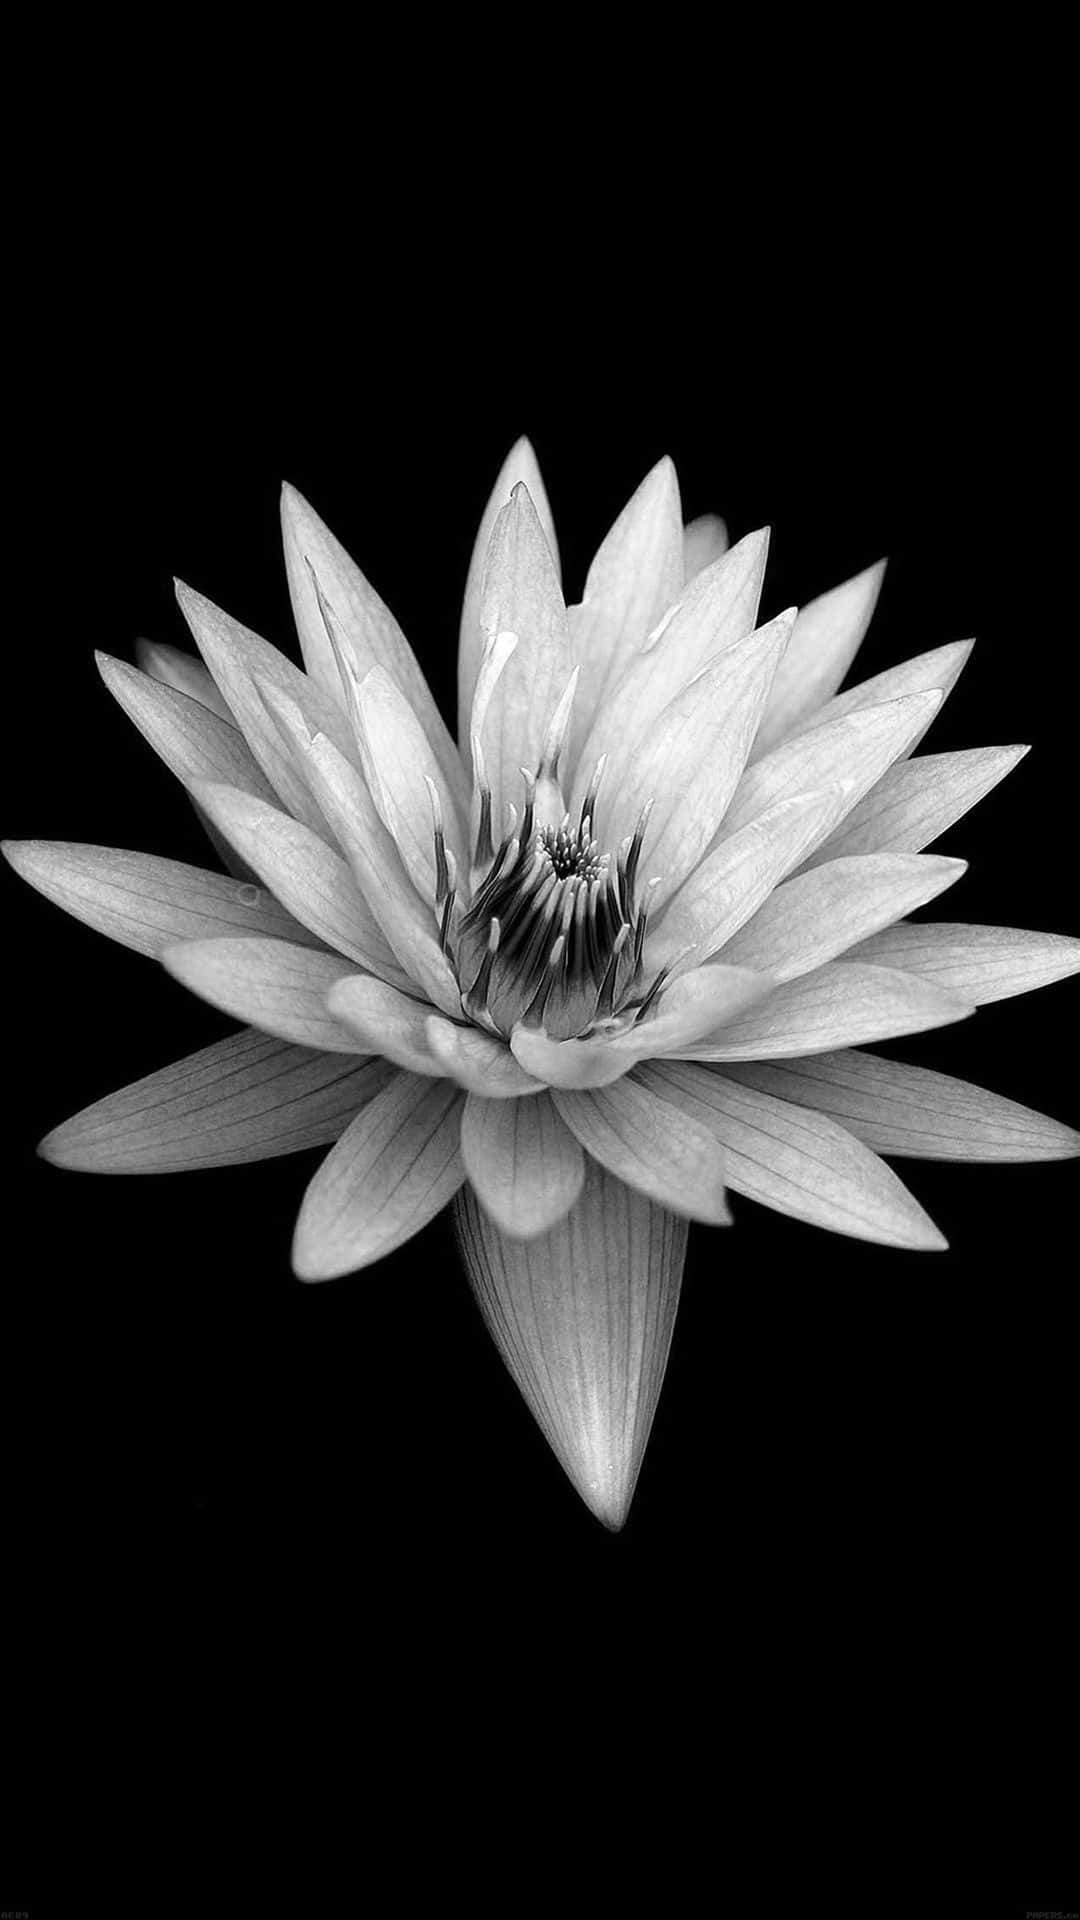 Beautiful black and white flower